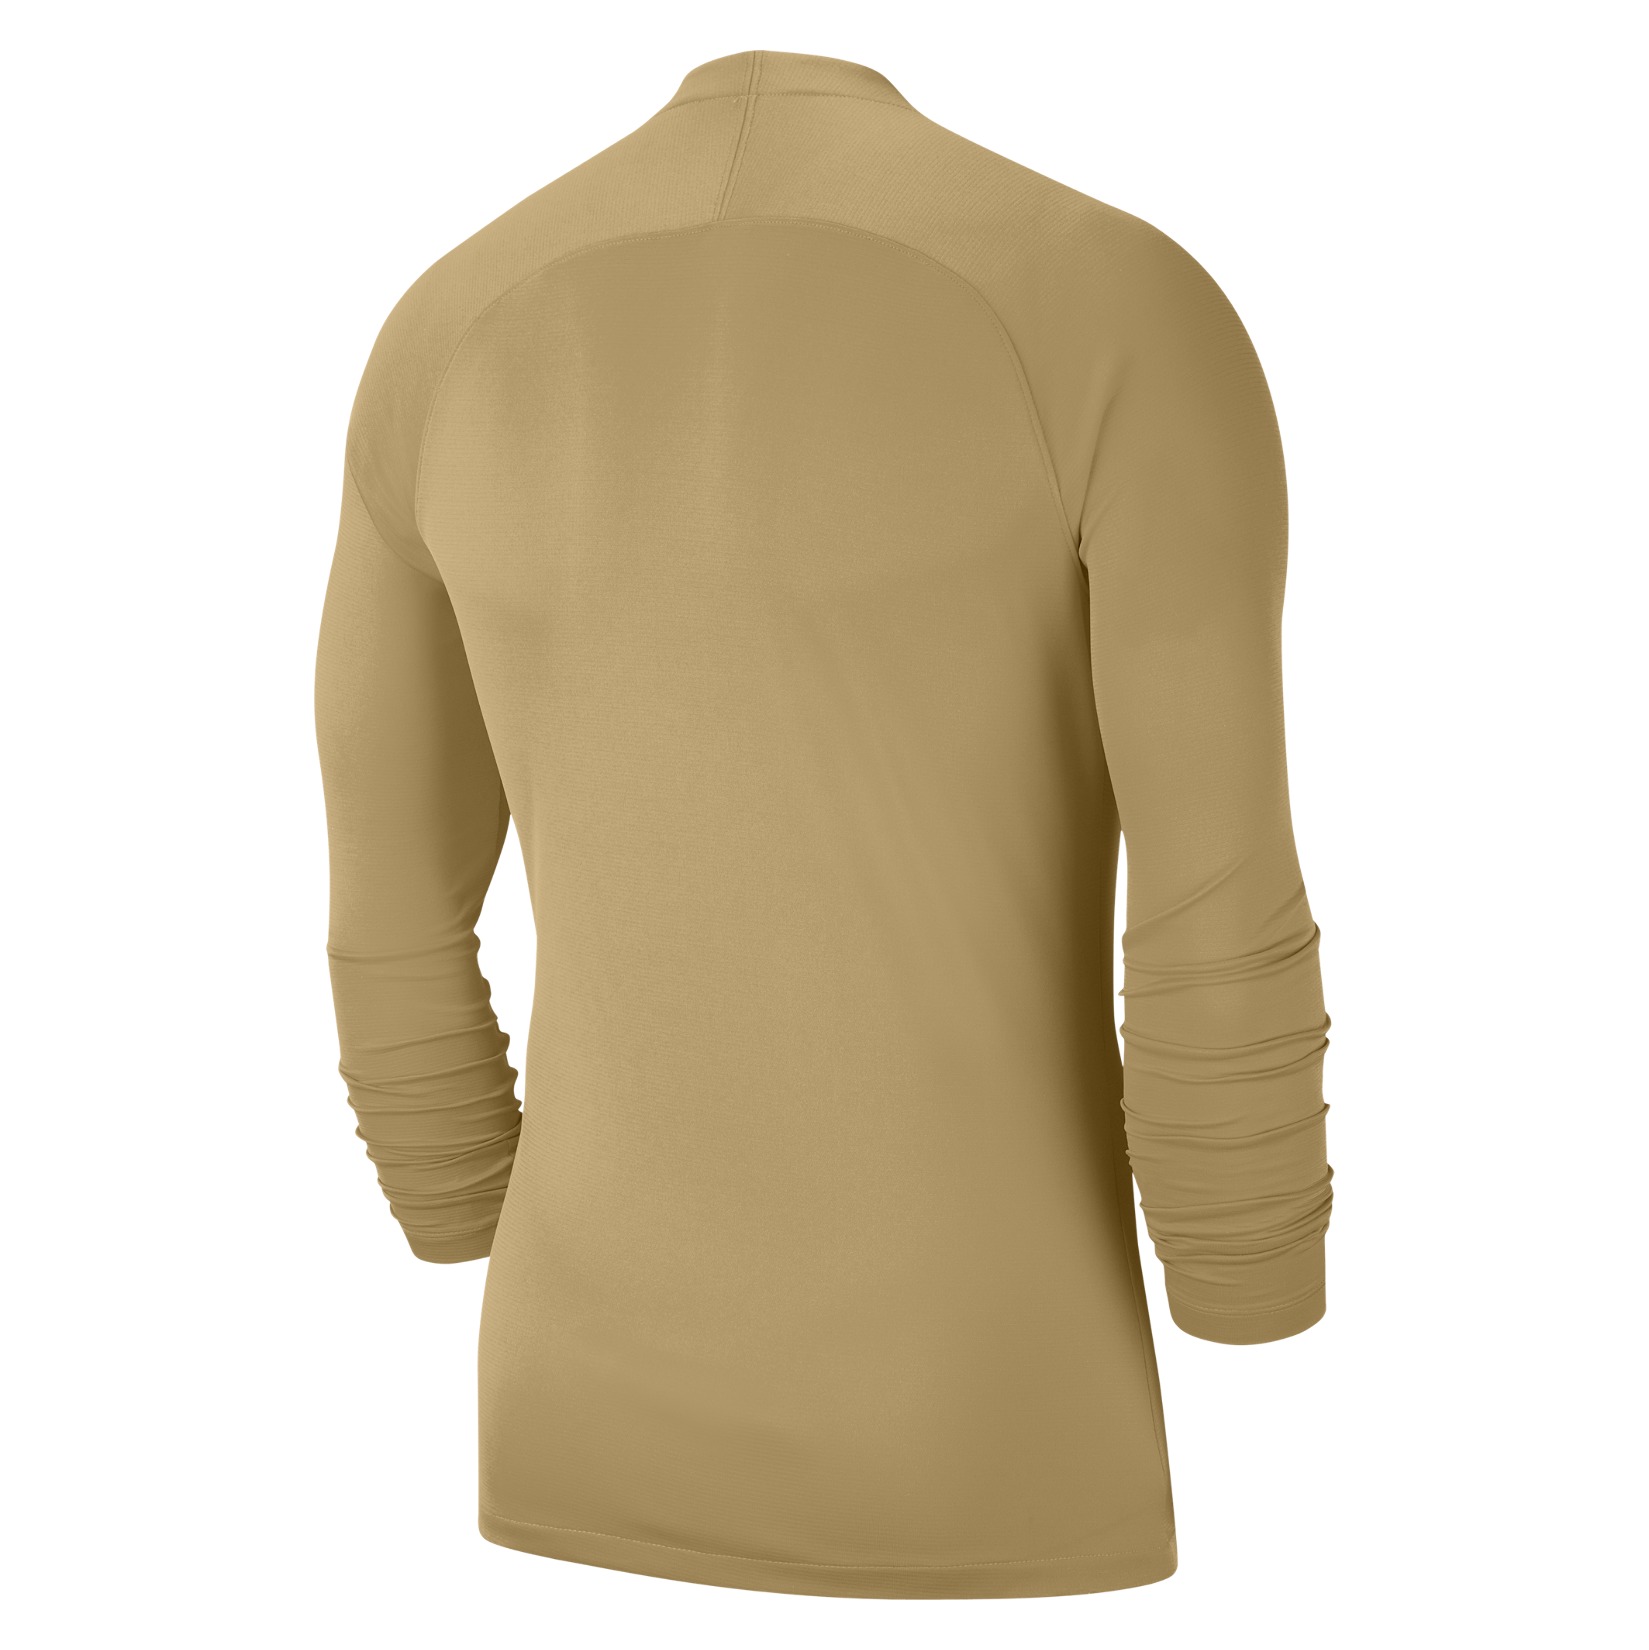 Nike Dri-FIT Park First Layer Jersey Gold-Black